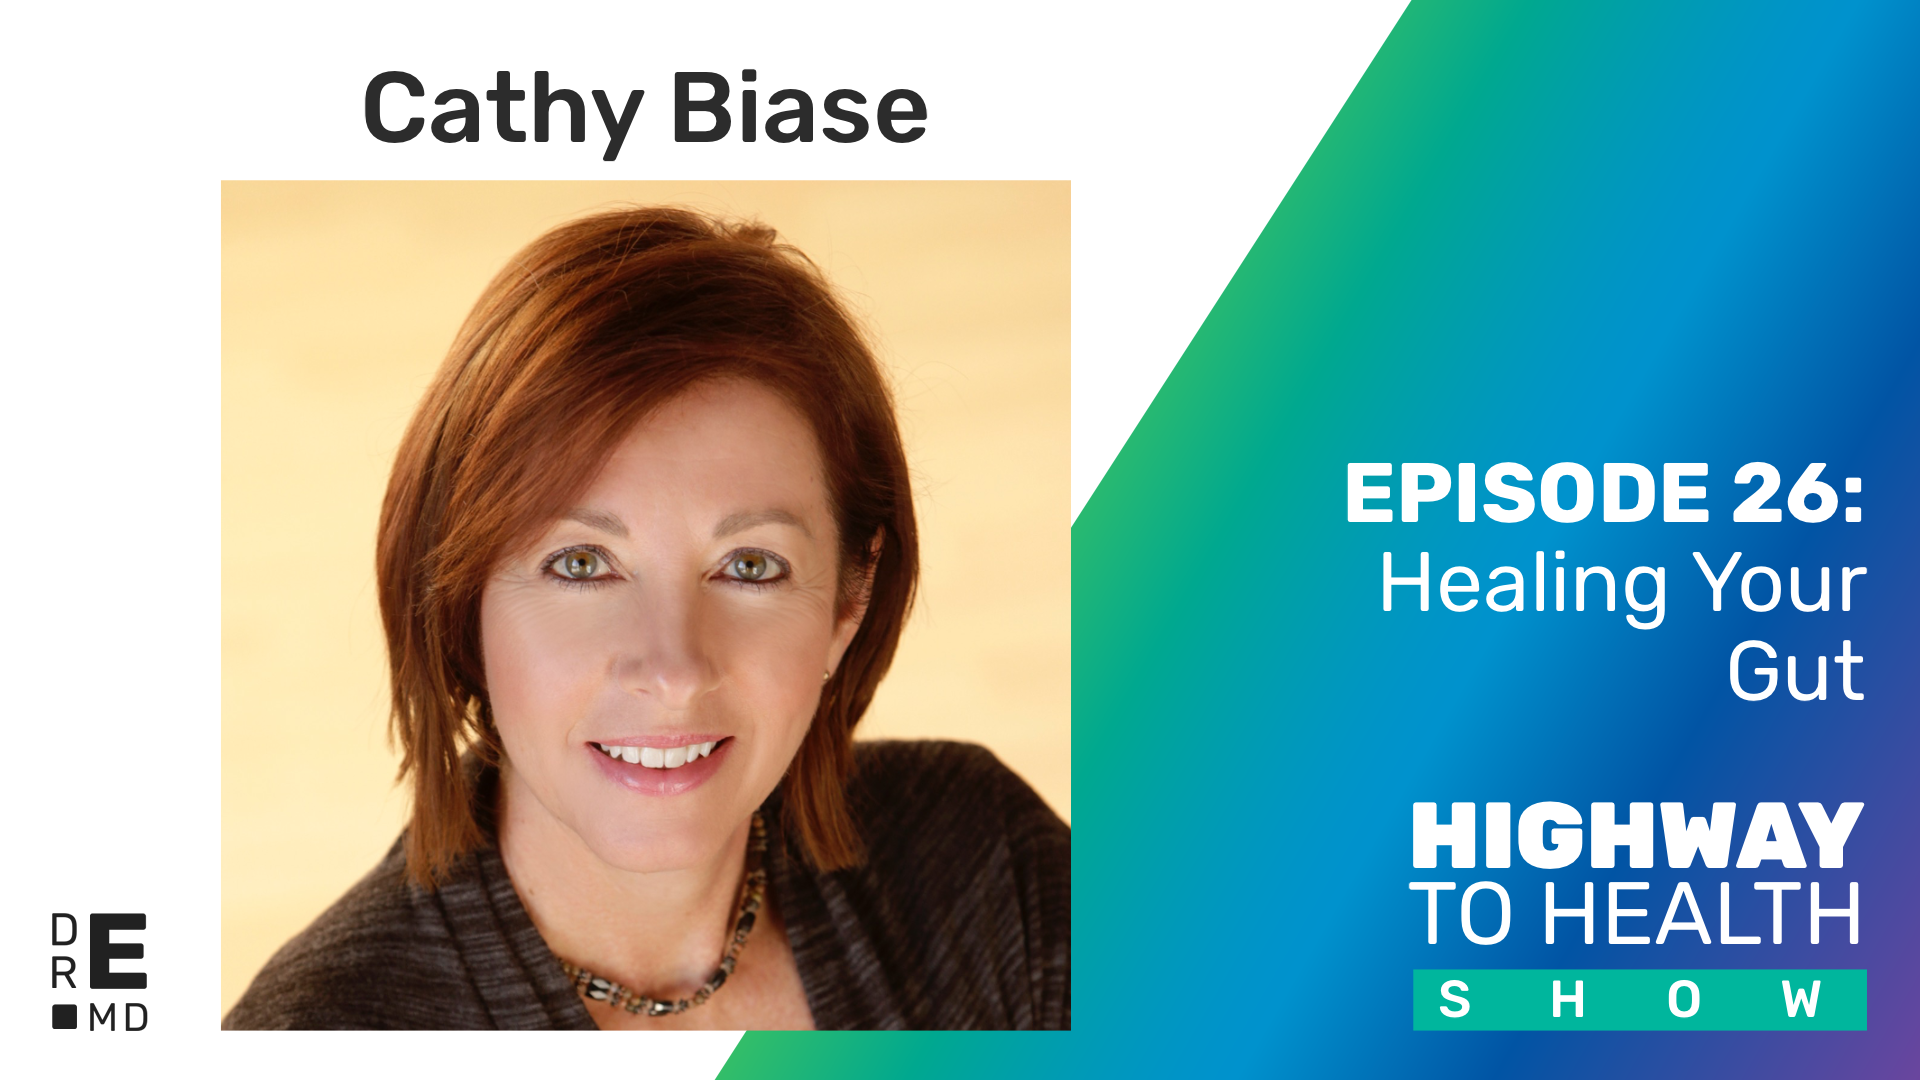 26: Healing Your Gut with Cathy Biase